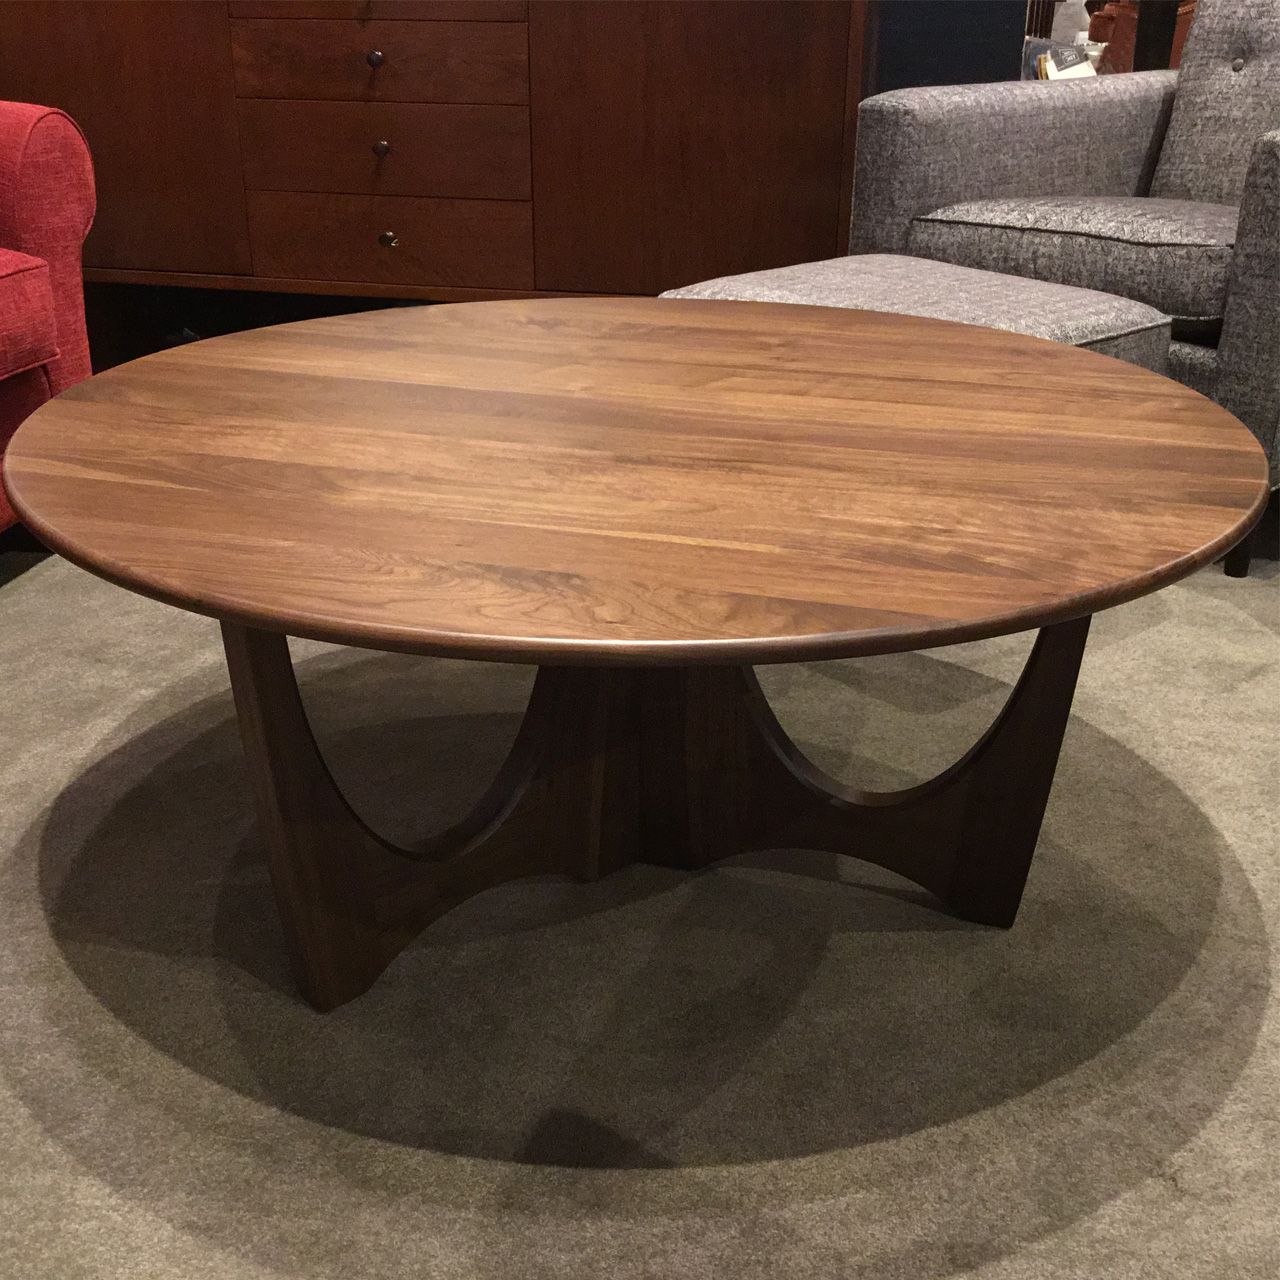 Preferred Dark Walnut Drink Tables Within Stickley Walnut Grove Cocktail Table – Noriega Furniture (View 2 of 20)